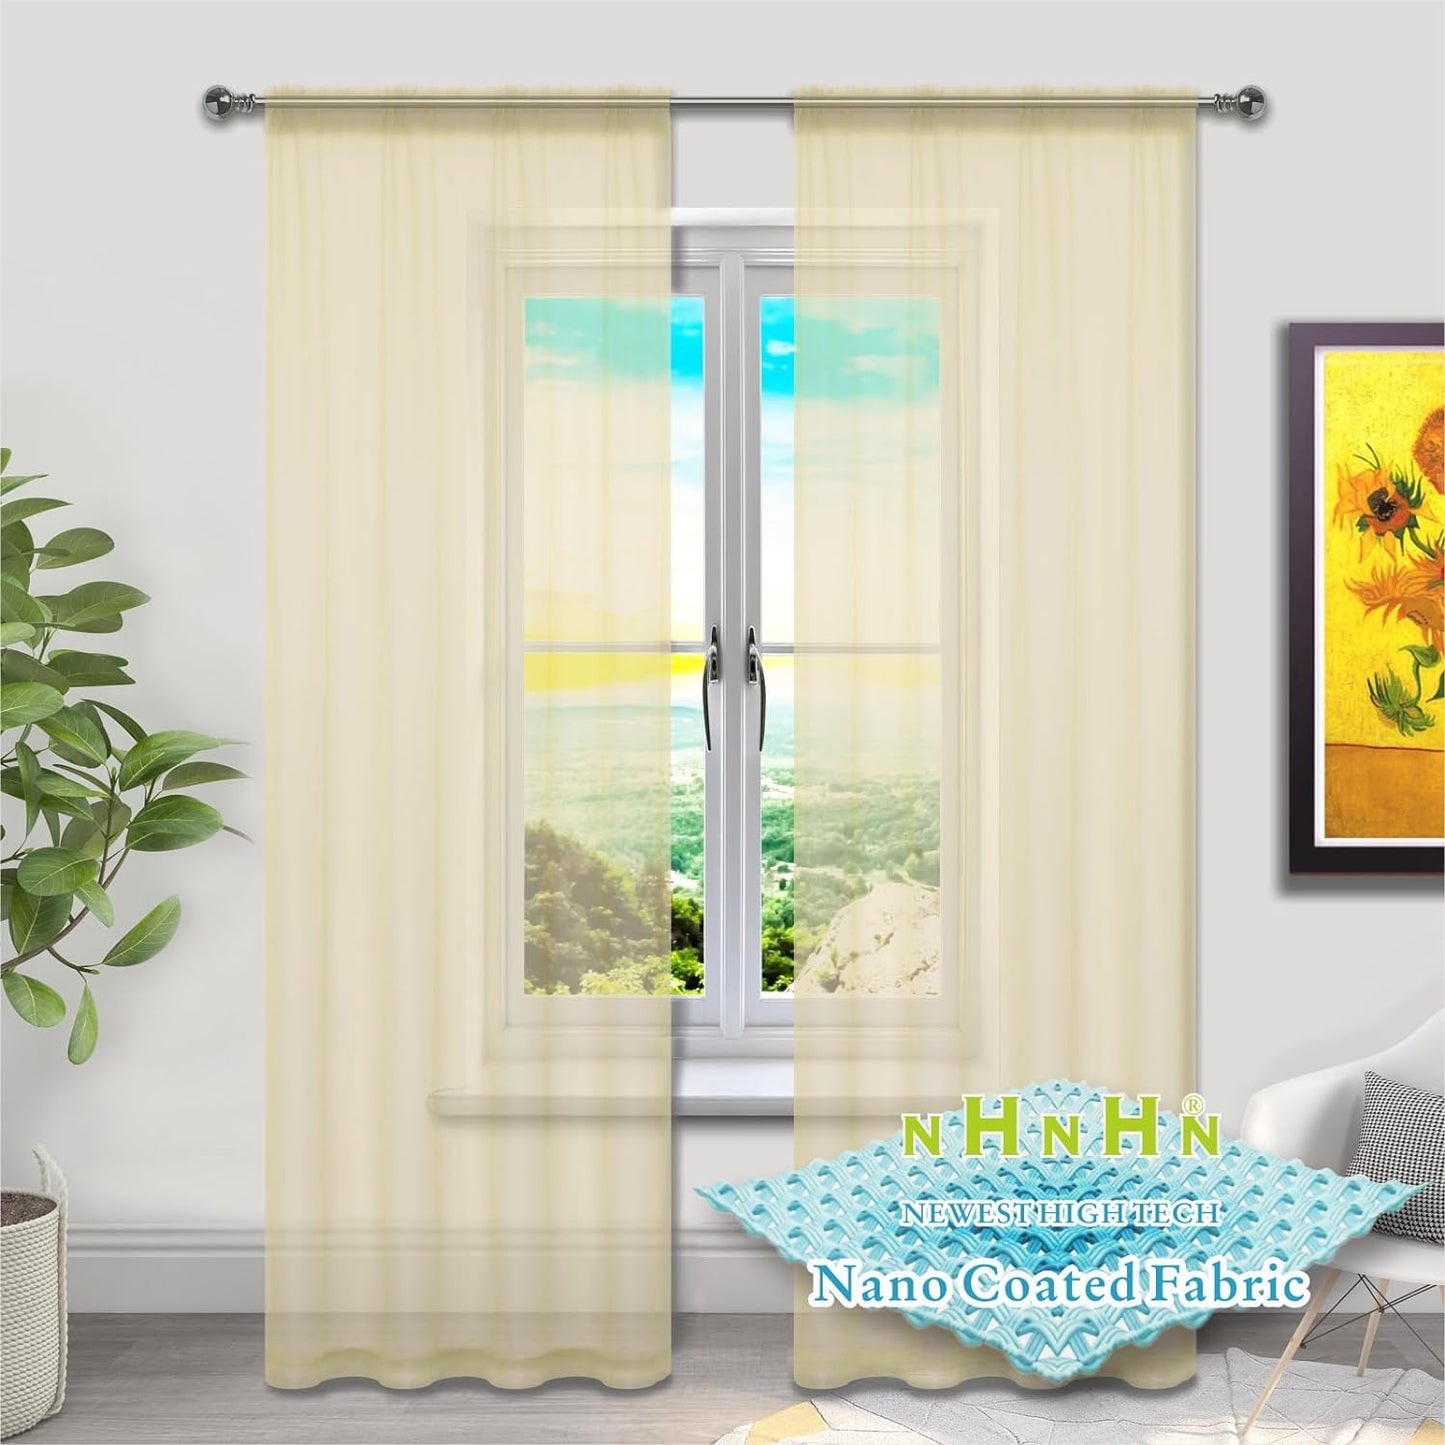 Nano Material Coated White Sheer Curtains 72 Inches Long, Rod Pocket Window Drapes Voile Sheer Curtain 2 Panels for Living Room Bedroom Kitchen (White, W52 X L72)  NHNHN Cream 52W X 72L | 2 Panels 